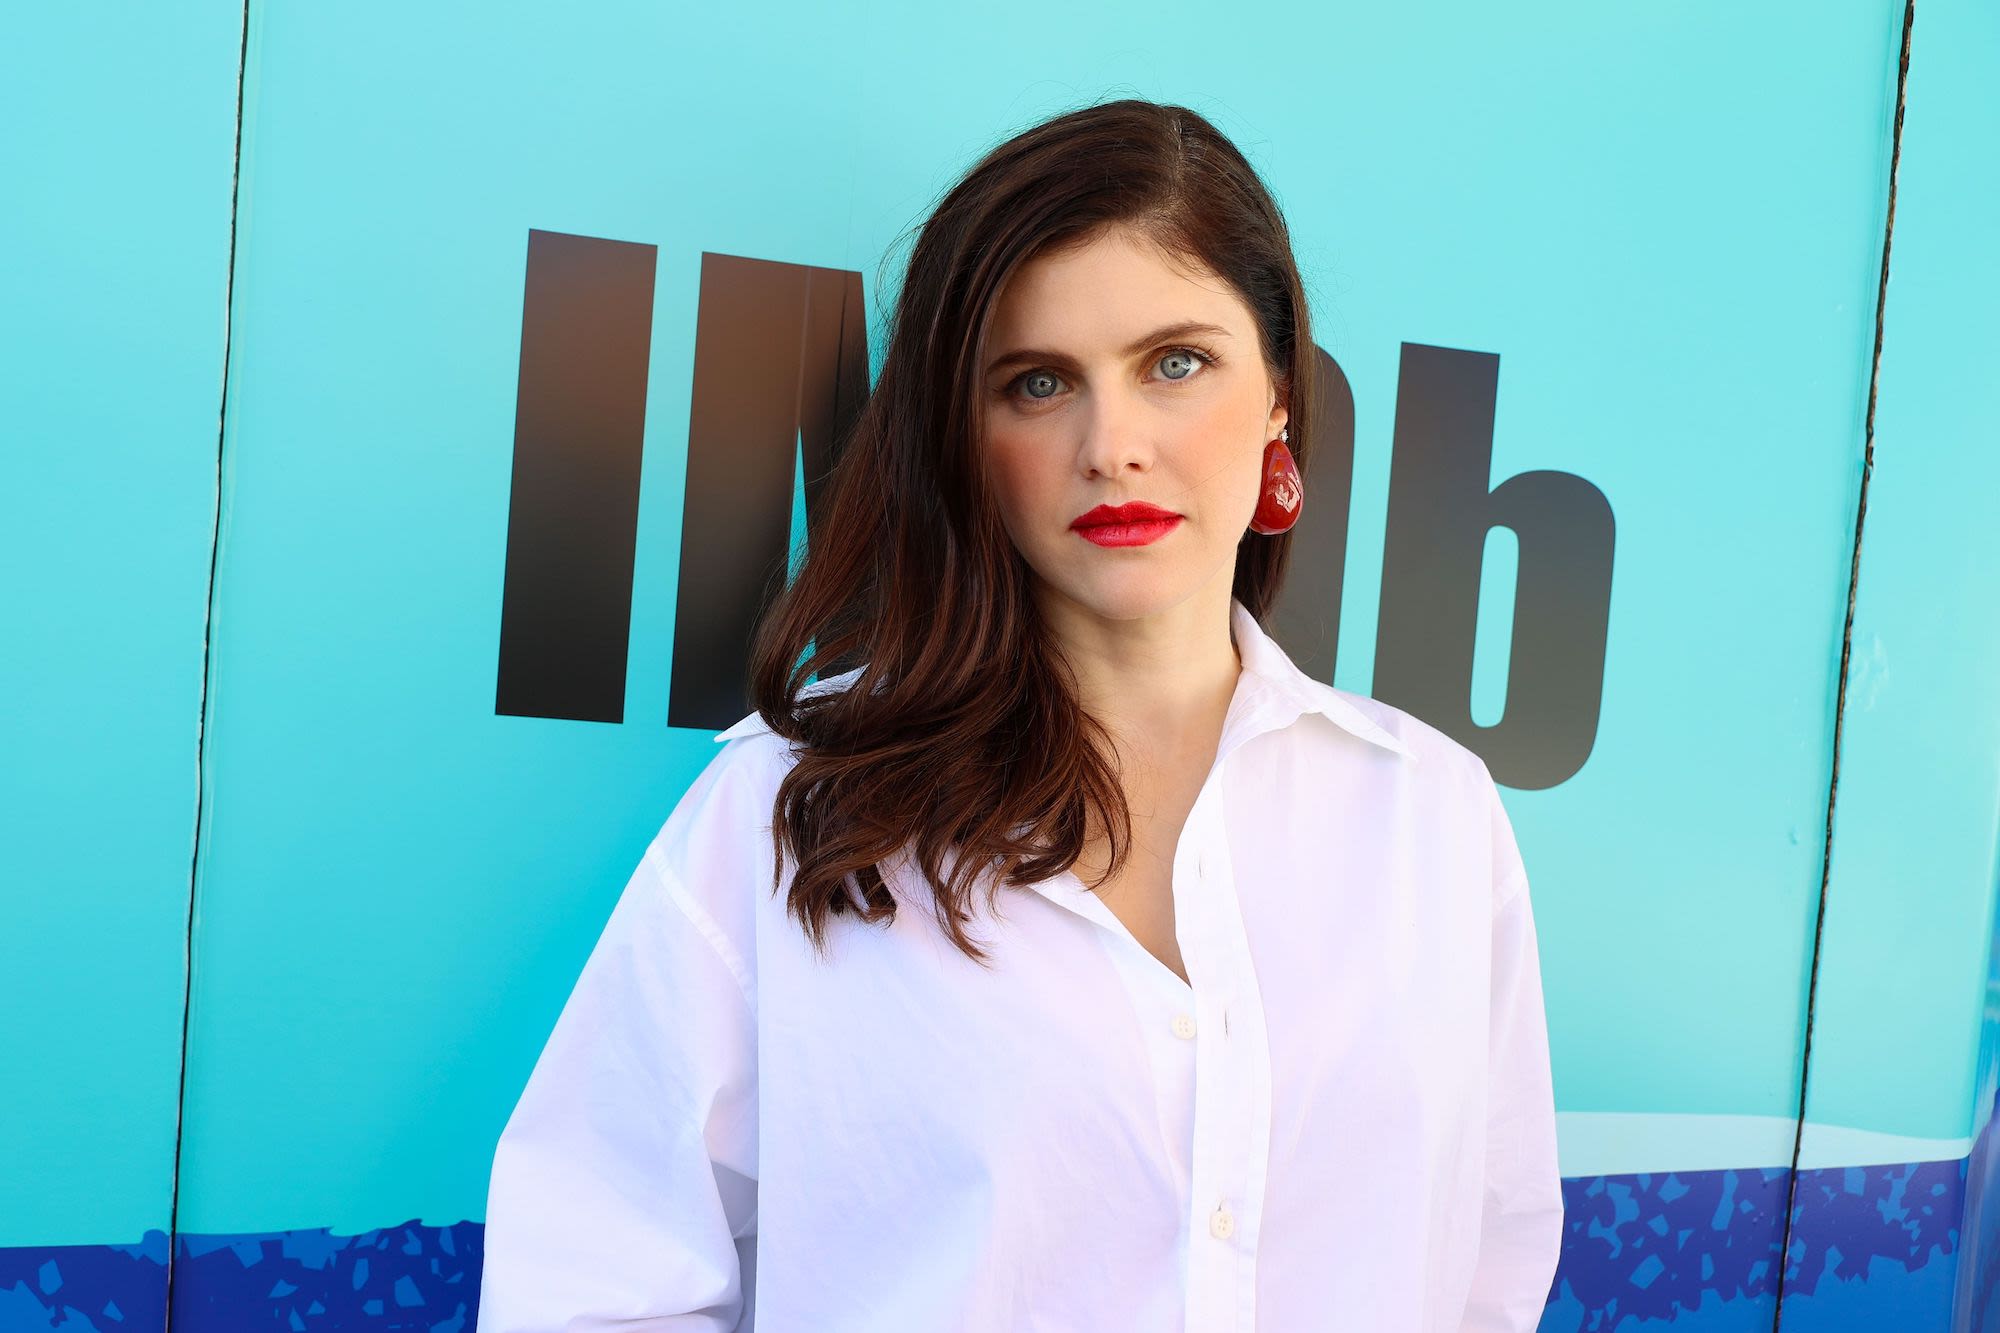 Alexandra Daddario Was a ‘Vomit Monster’ While Hiding Her Pregnancy on ‘Mayfair Witches’ Season 2